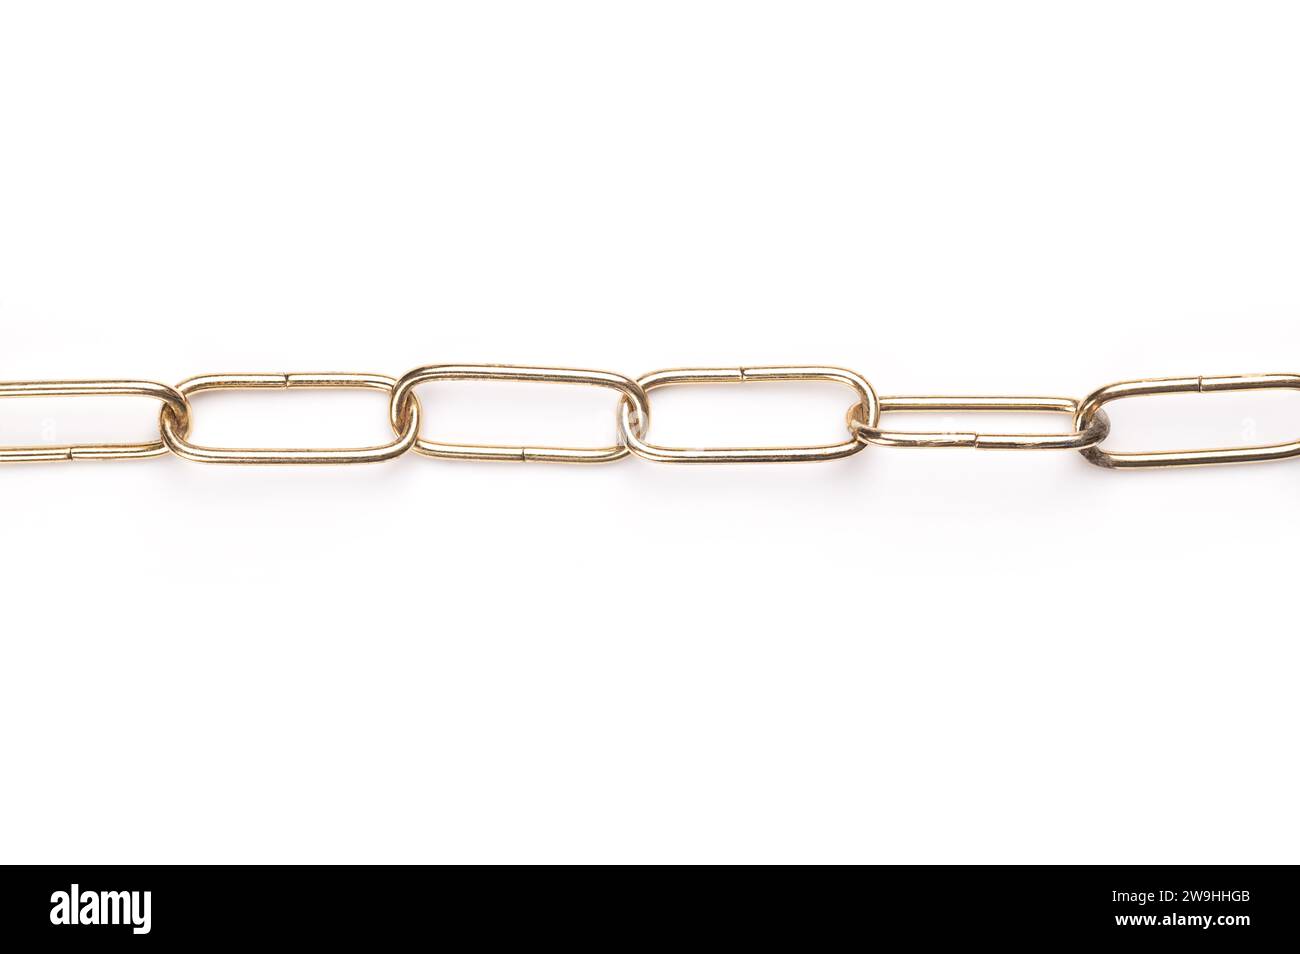 Elongated steel chain with shiny, brass plated surface, straight shaped, with rounded links. Smooth and decorative ring chain, made of round wire. Stock Photo